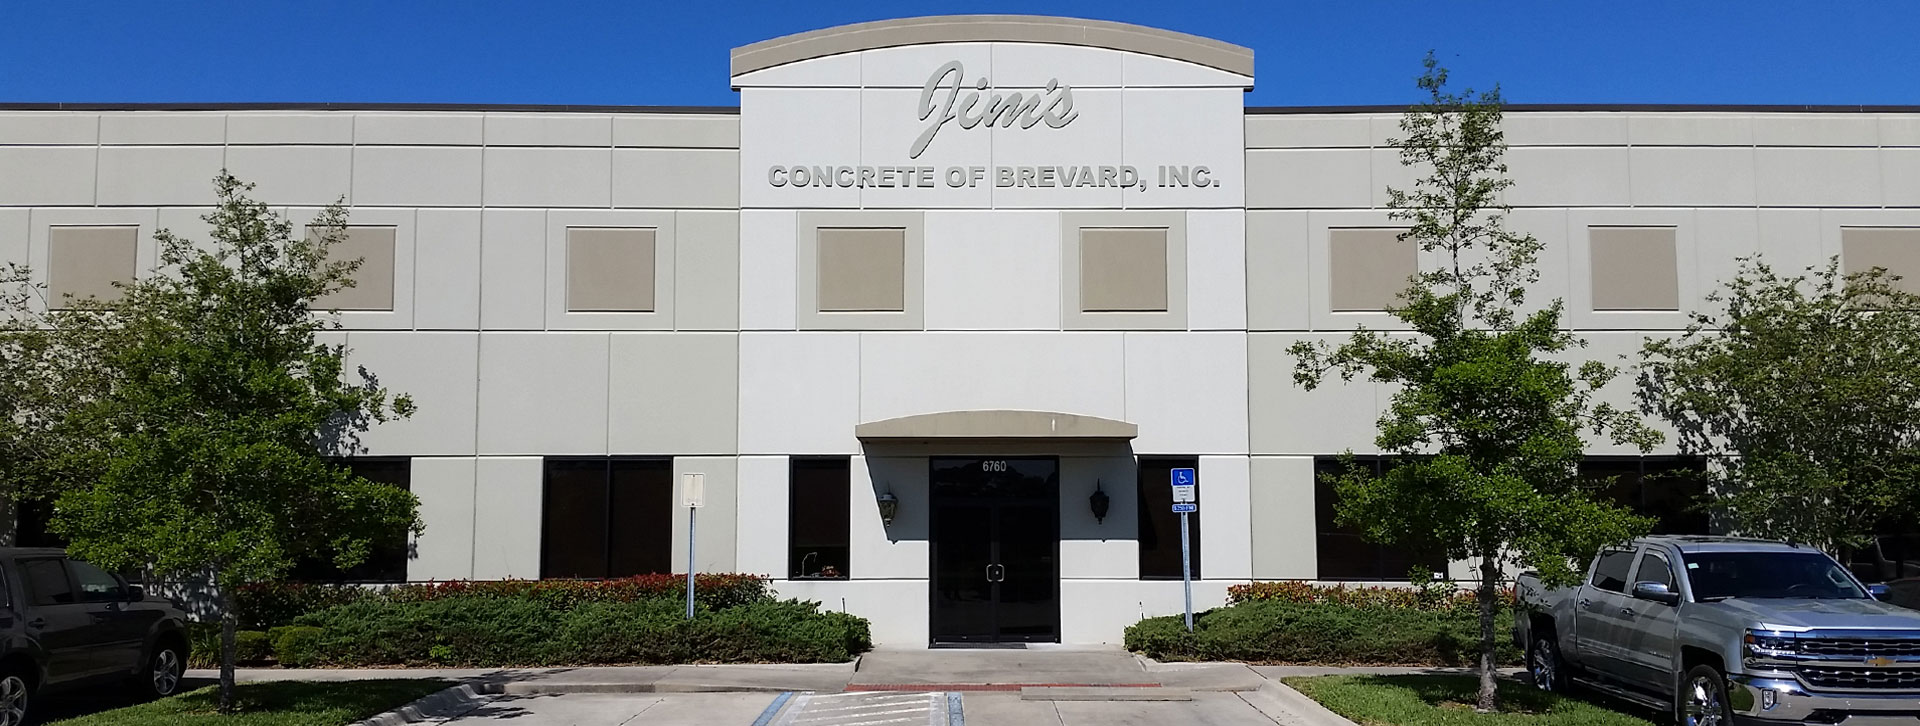 Jim's Concrete: Turnkey Commercial Solutions